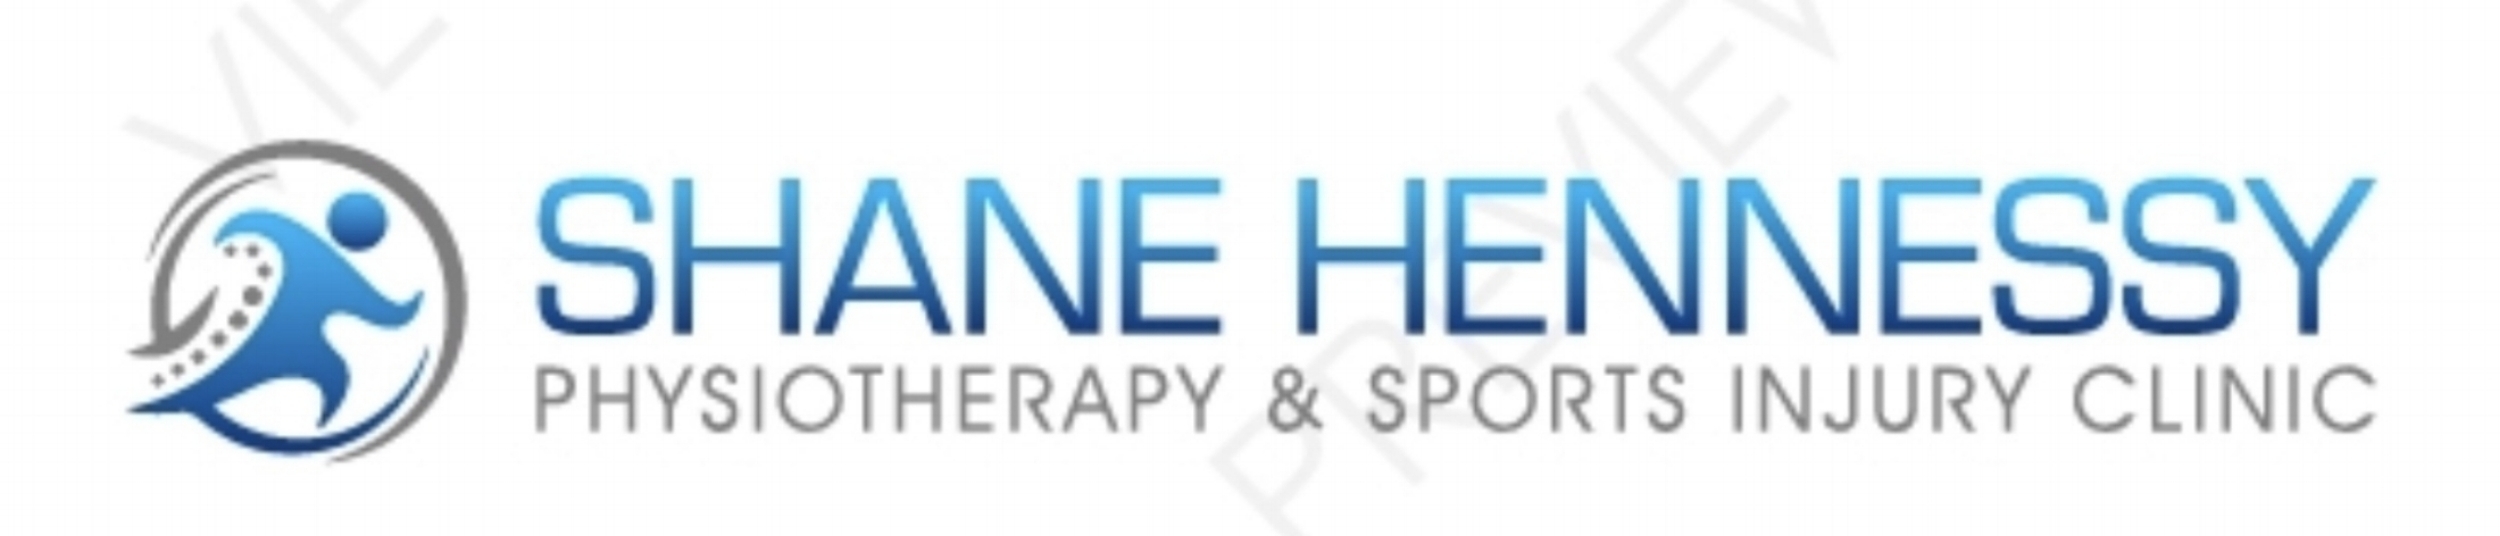 Shane Hennessy Physiotherapy &amp; Sports Injuries 